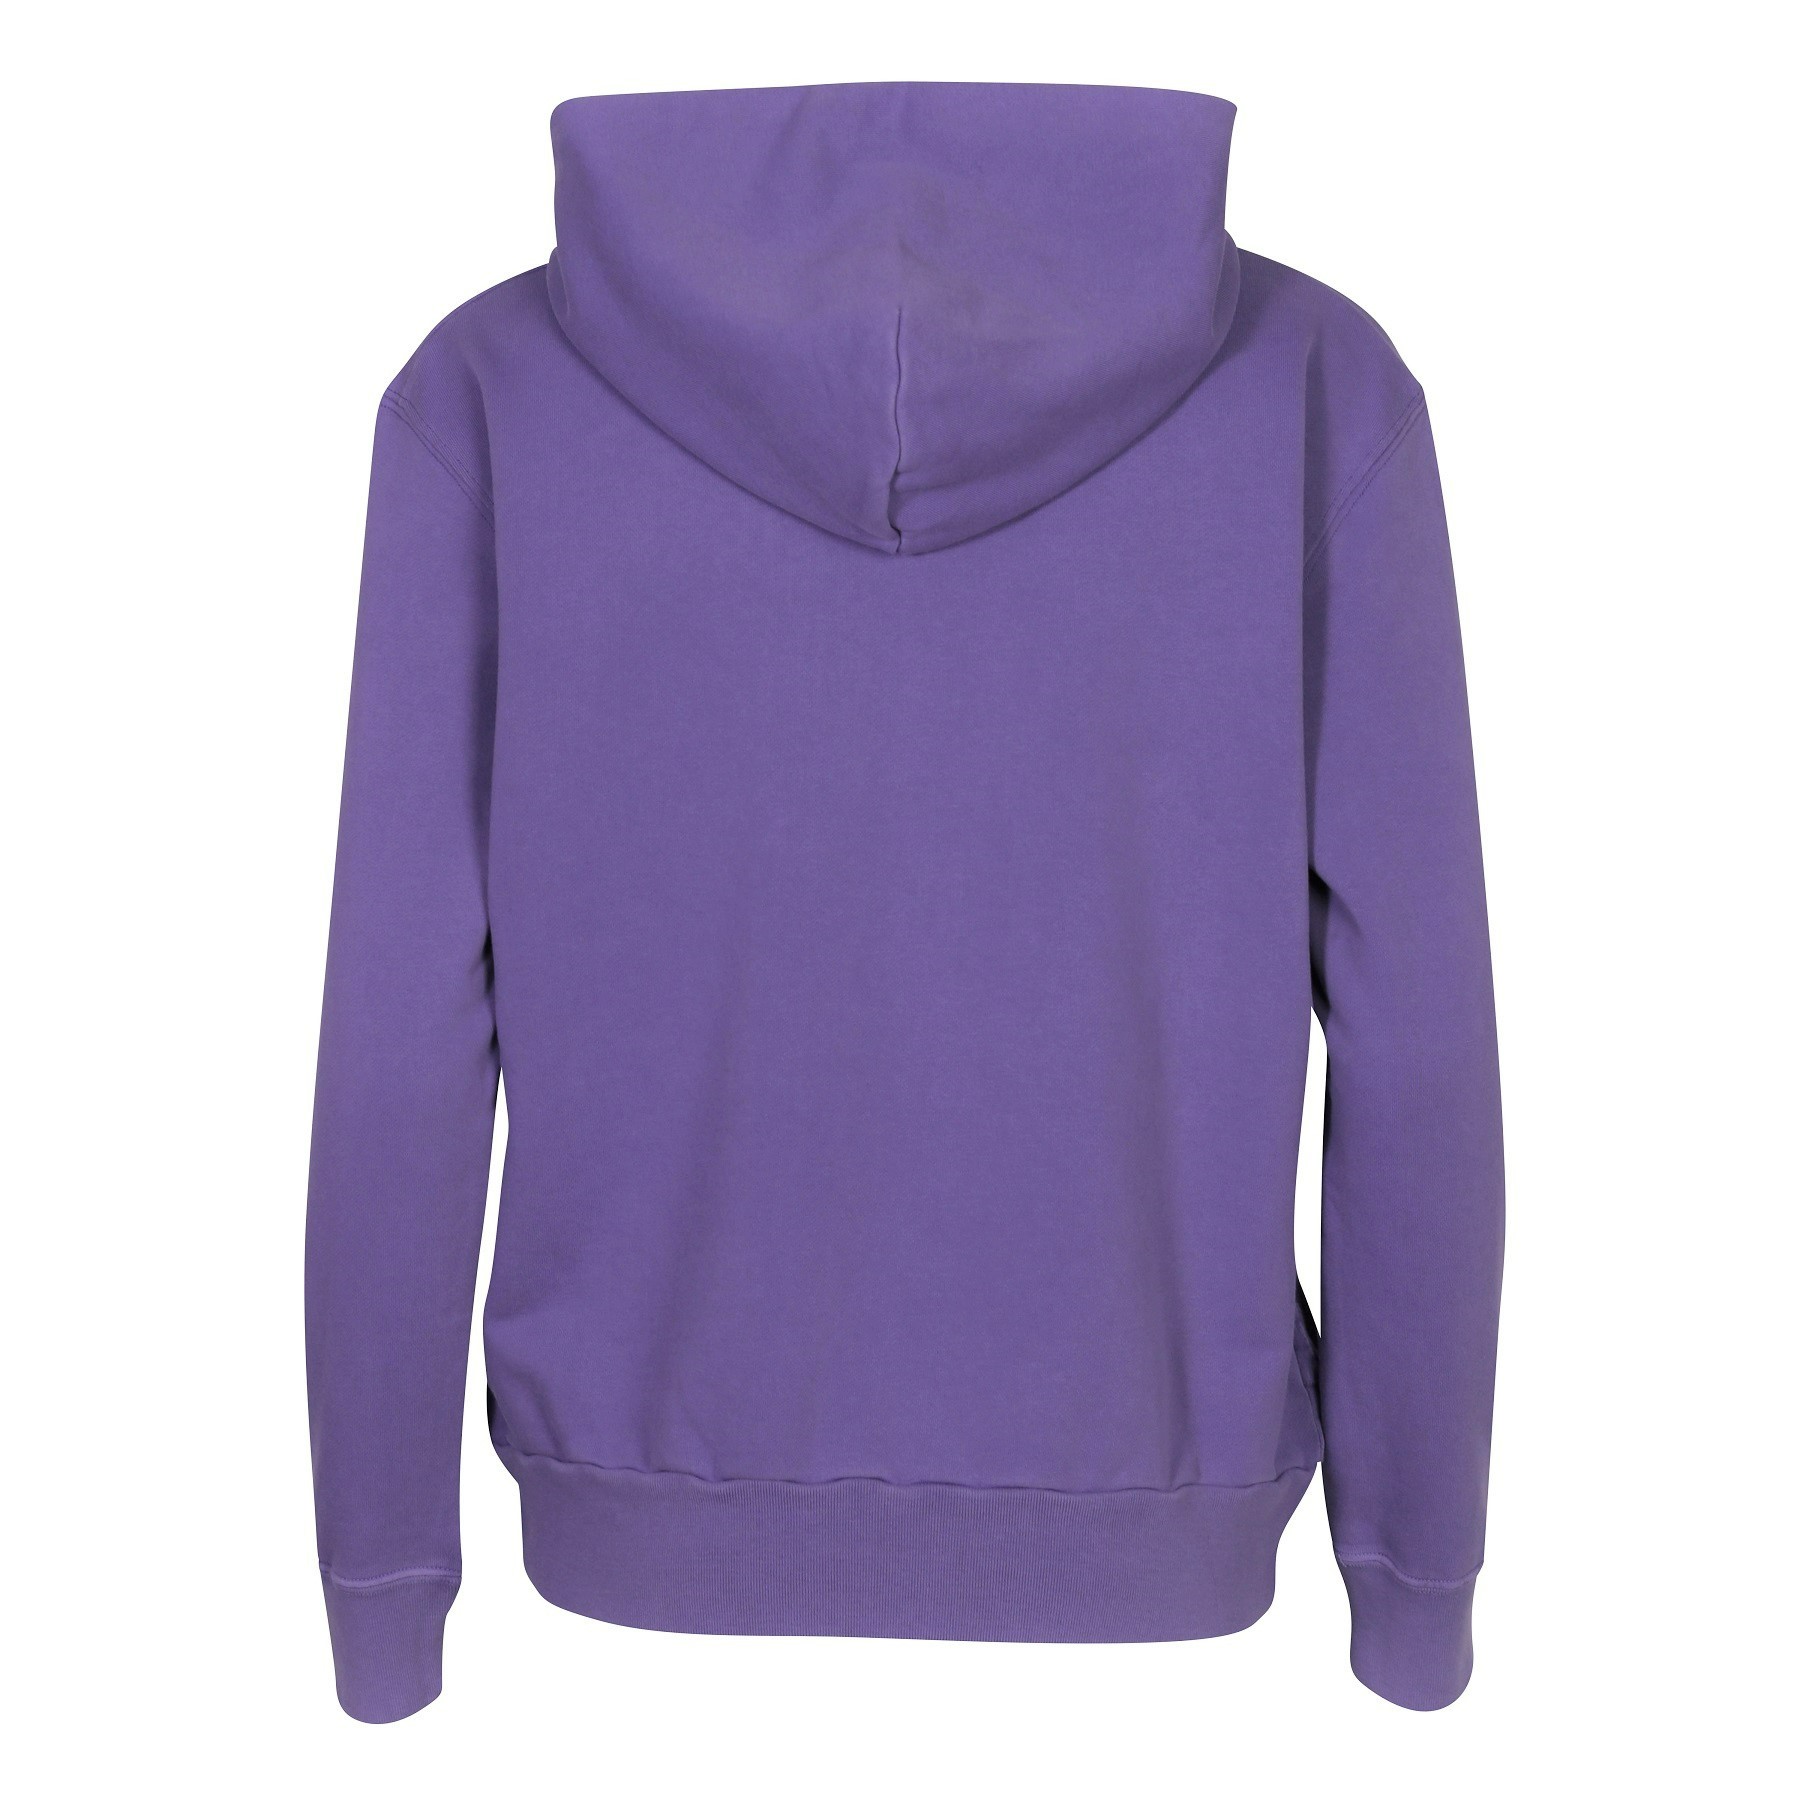 Autry Action Shoes Hoodie Supervintage in Tinto Lilac L